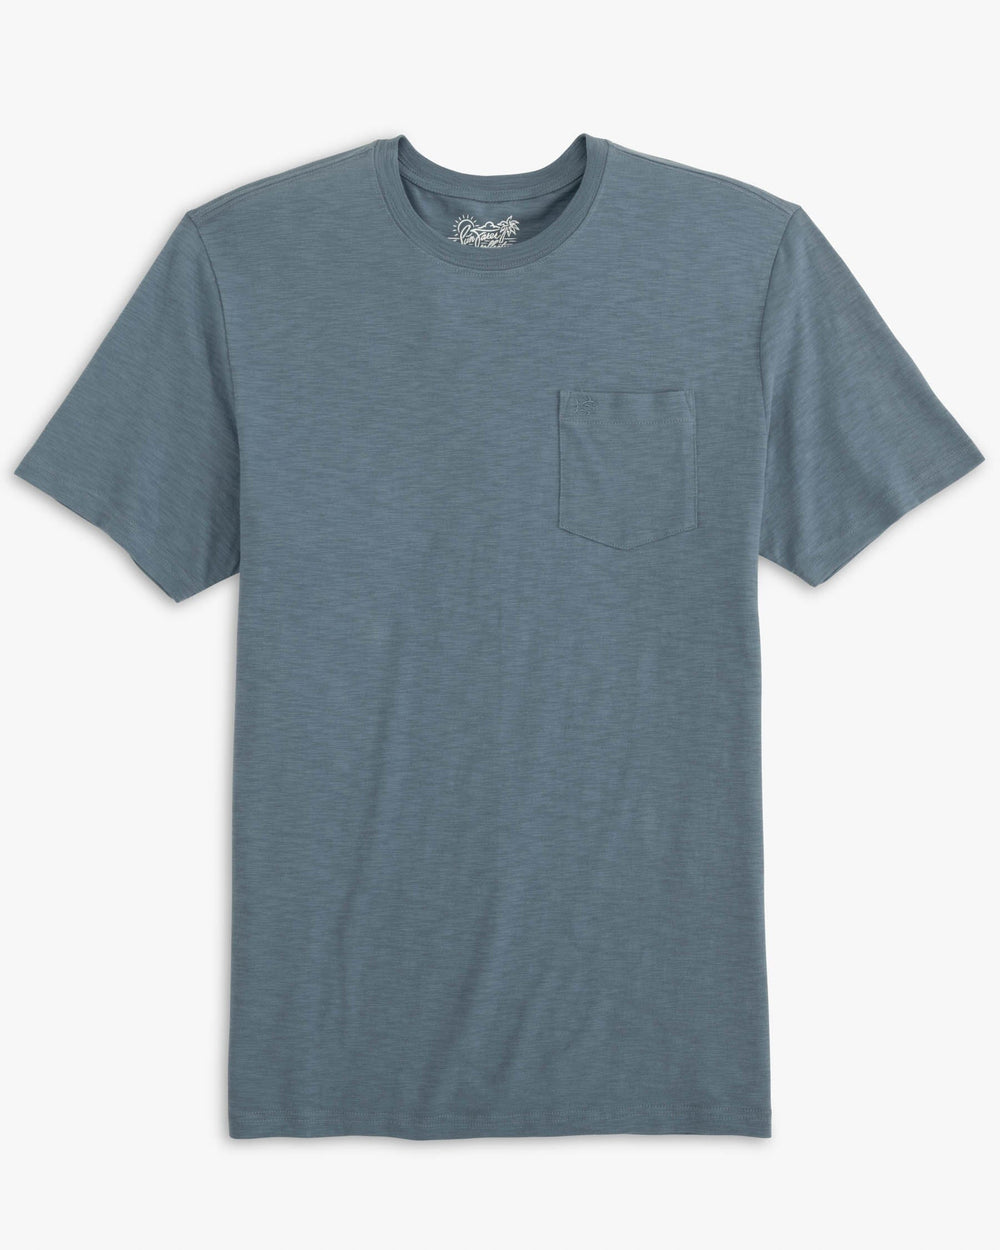 The front view of the Sun Farer T-Shirt by Southern Tide - Blue Haze